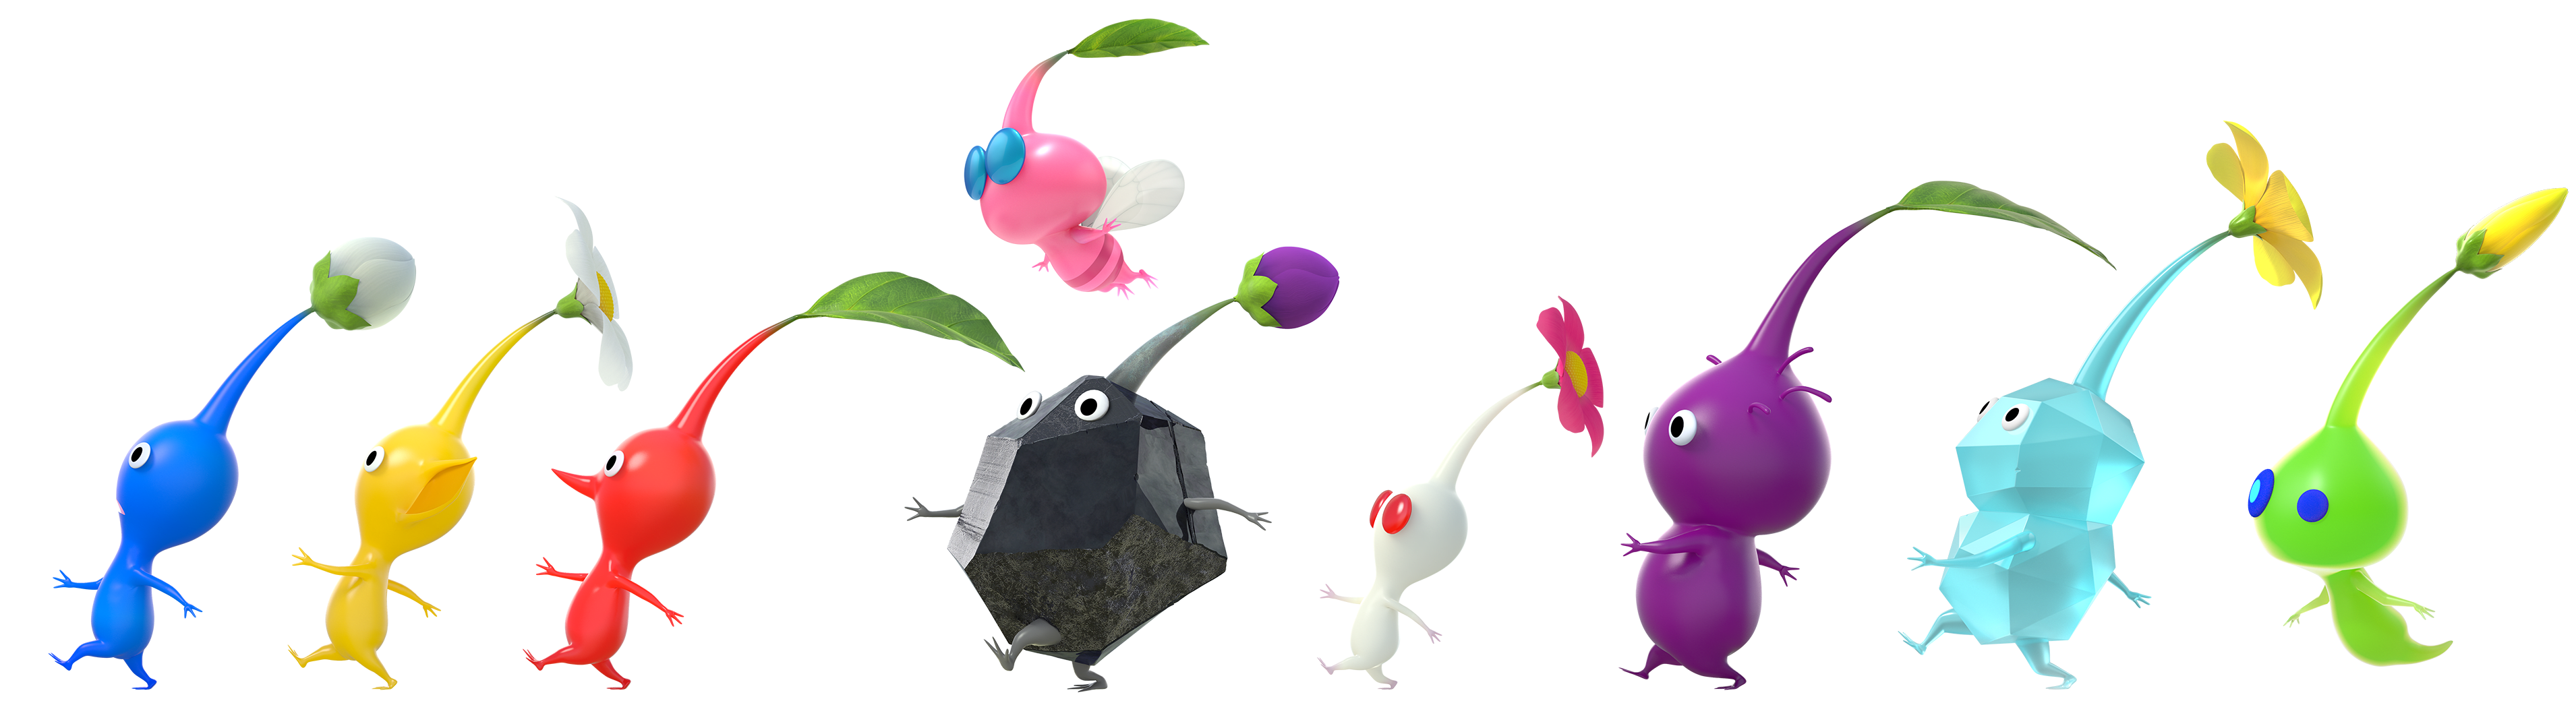 Discover the world of Pikmin - Varieties